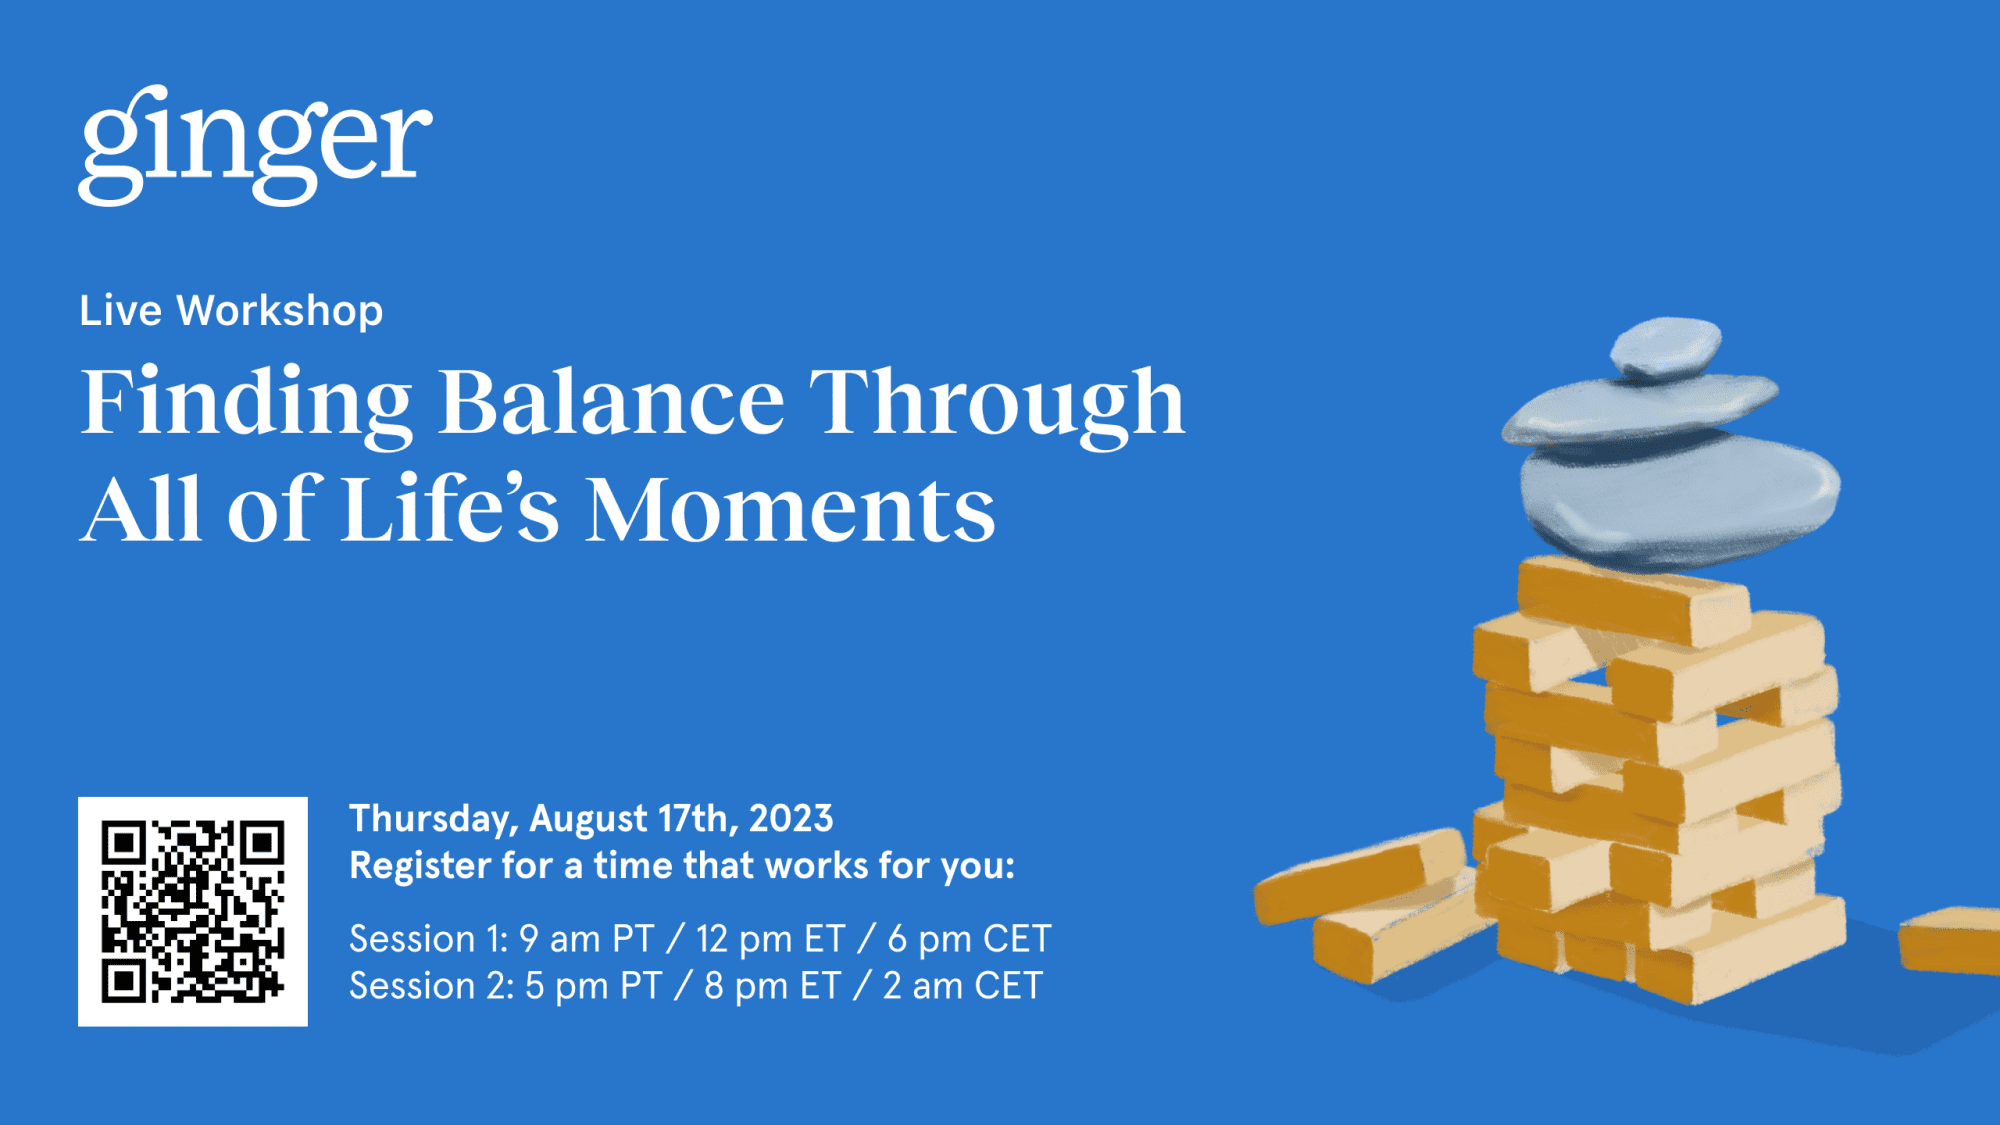 Ginger Live Workshop: Finding Balance through all of Live's Moments, Thursday August 17, 2023, Register for a time that works for you